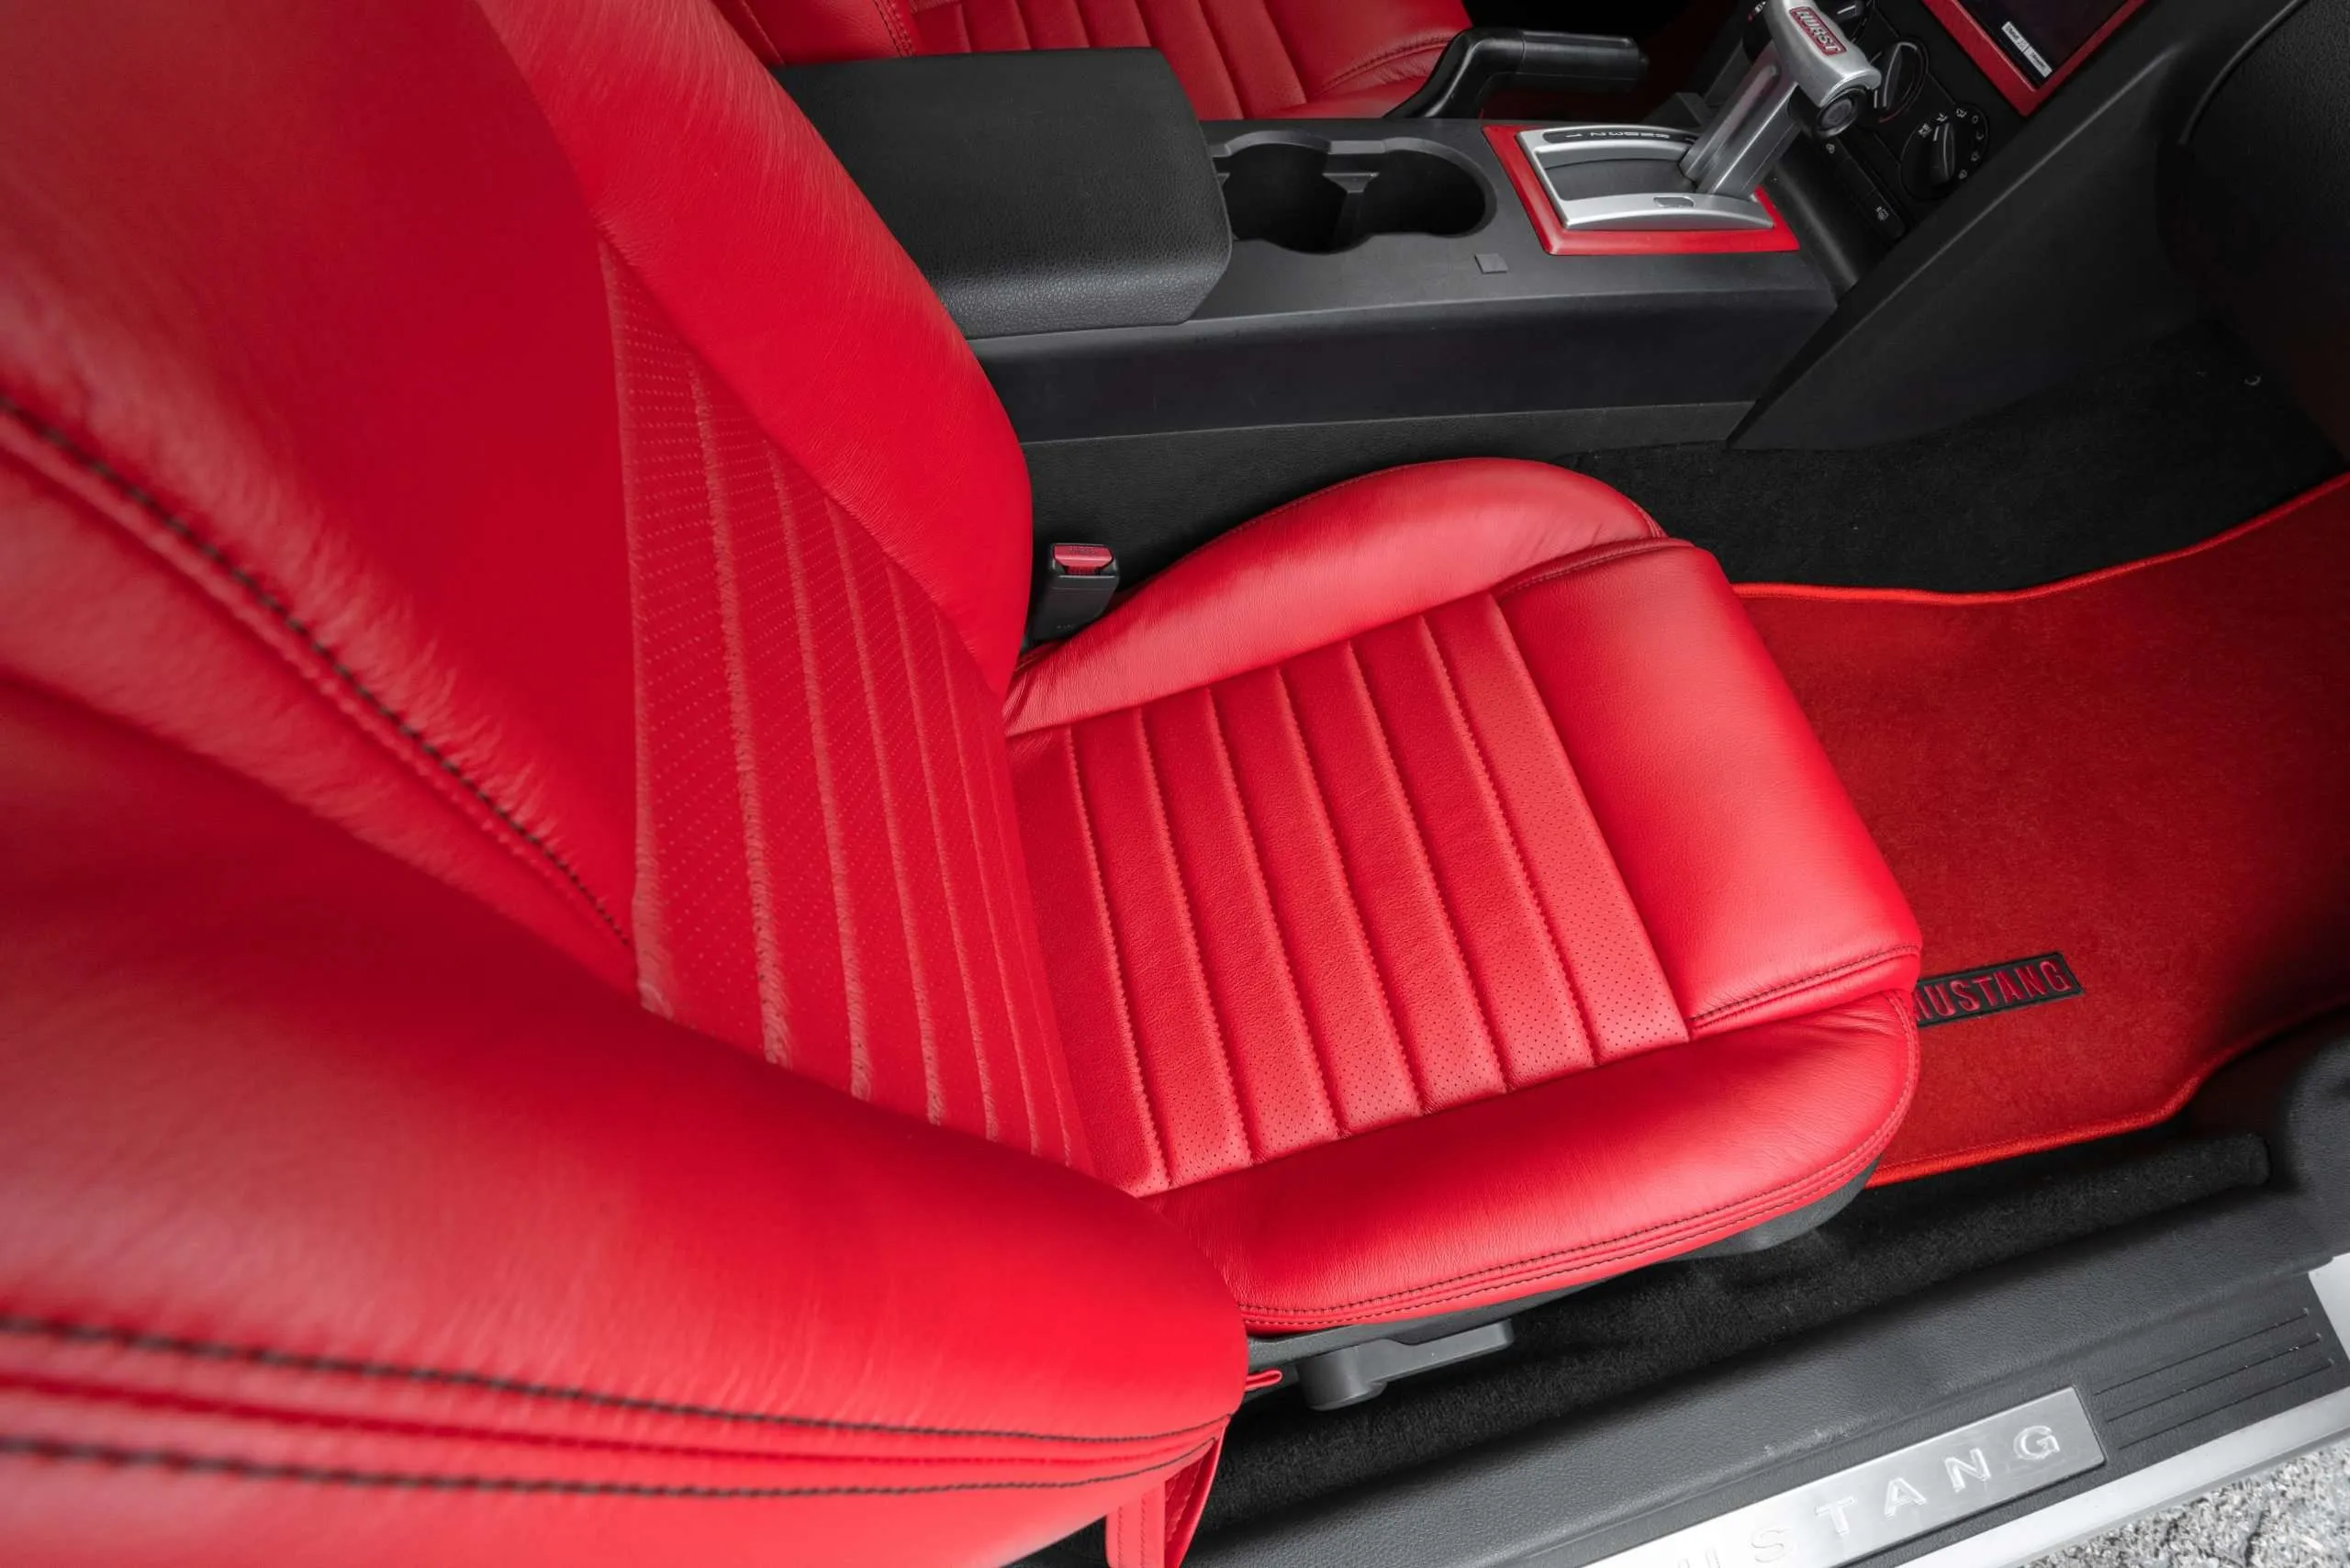 Top-down view of front passenger Bright Red leather seat with perforated inserts